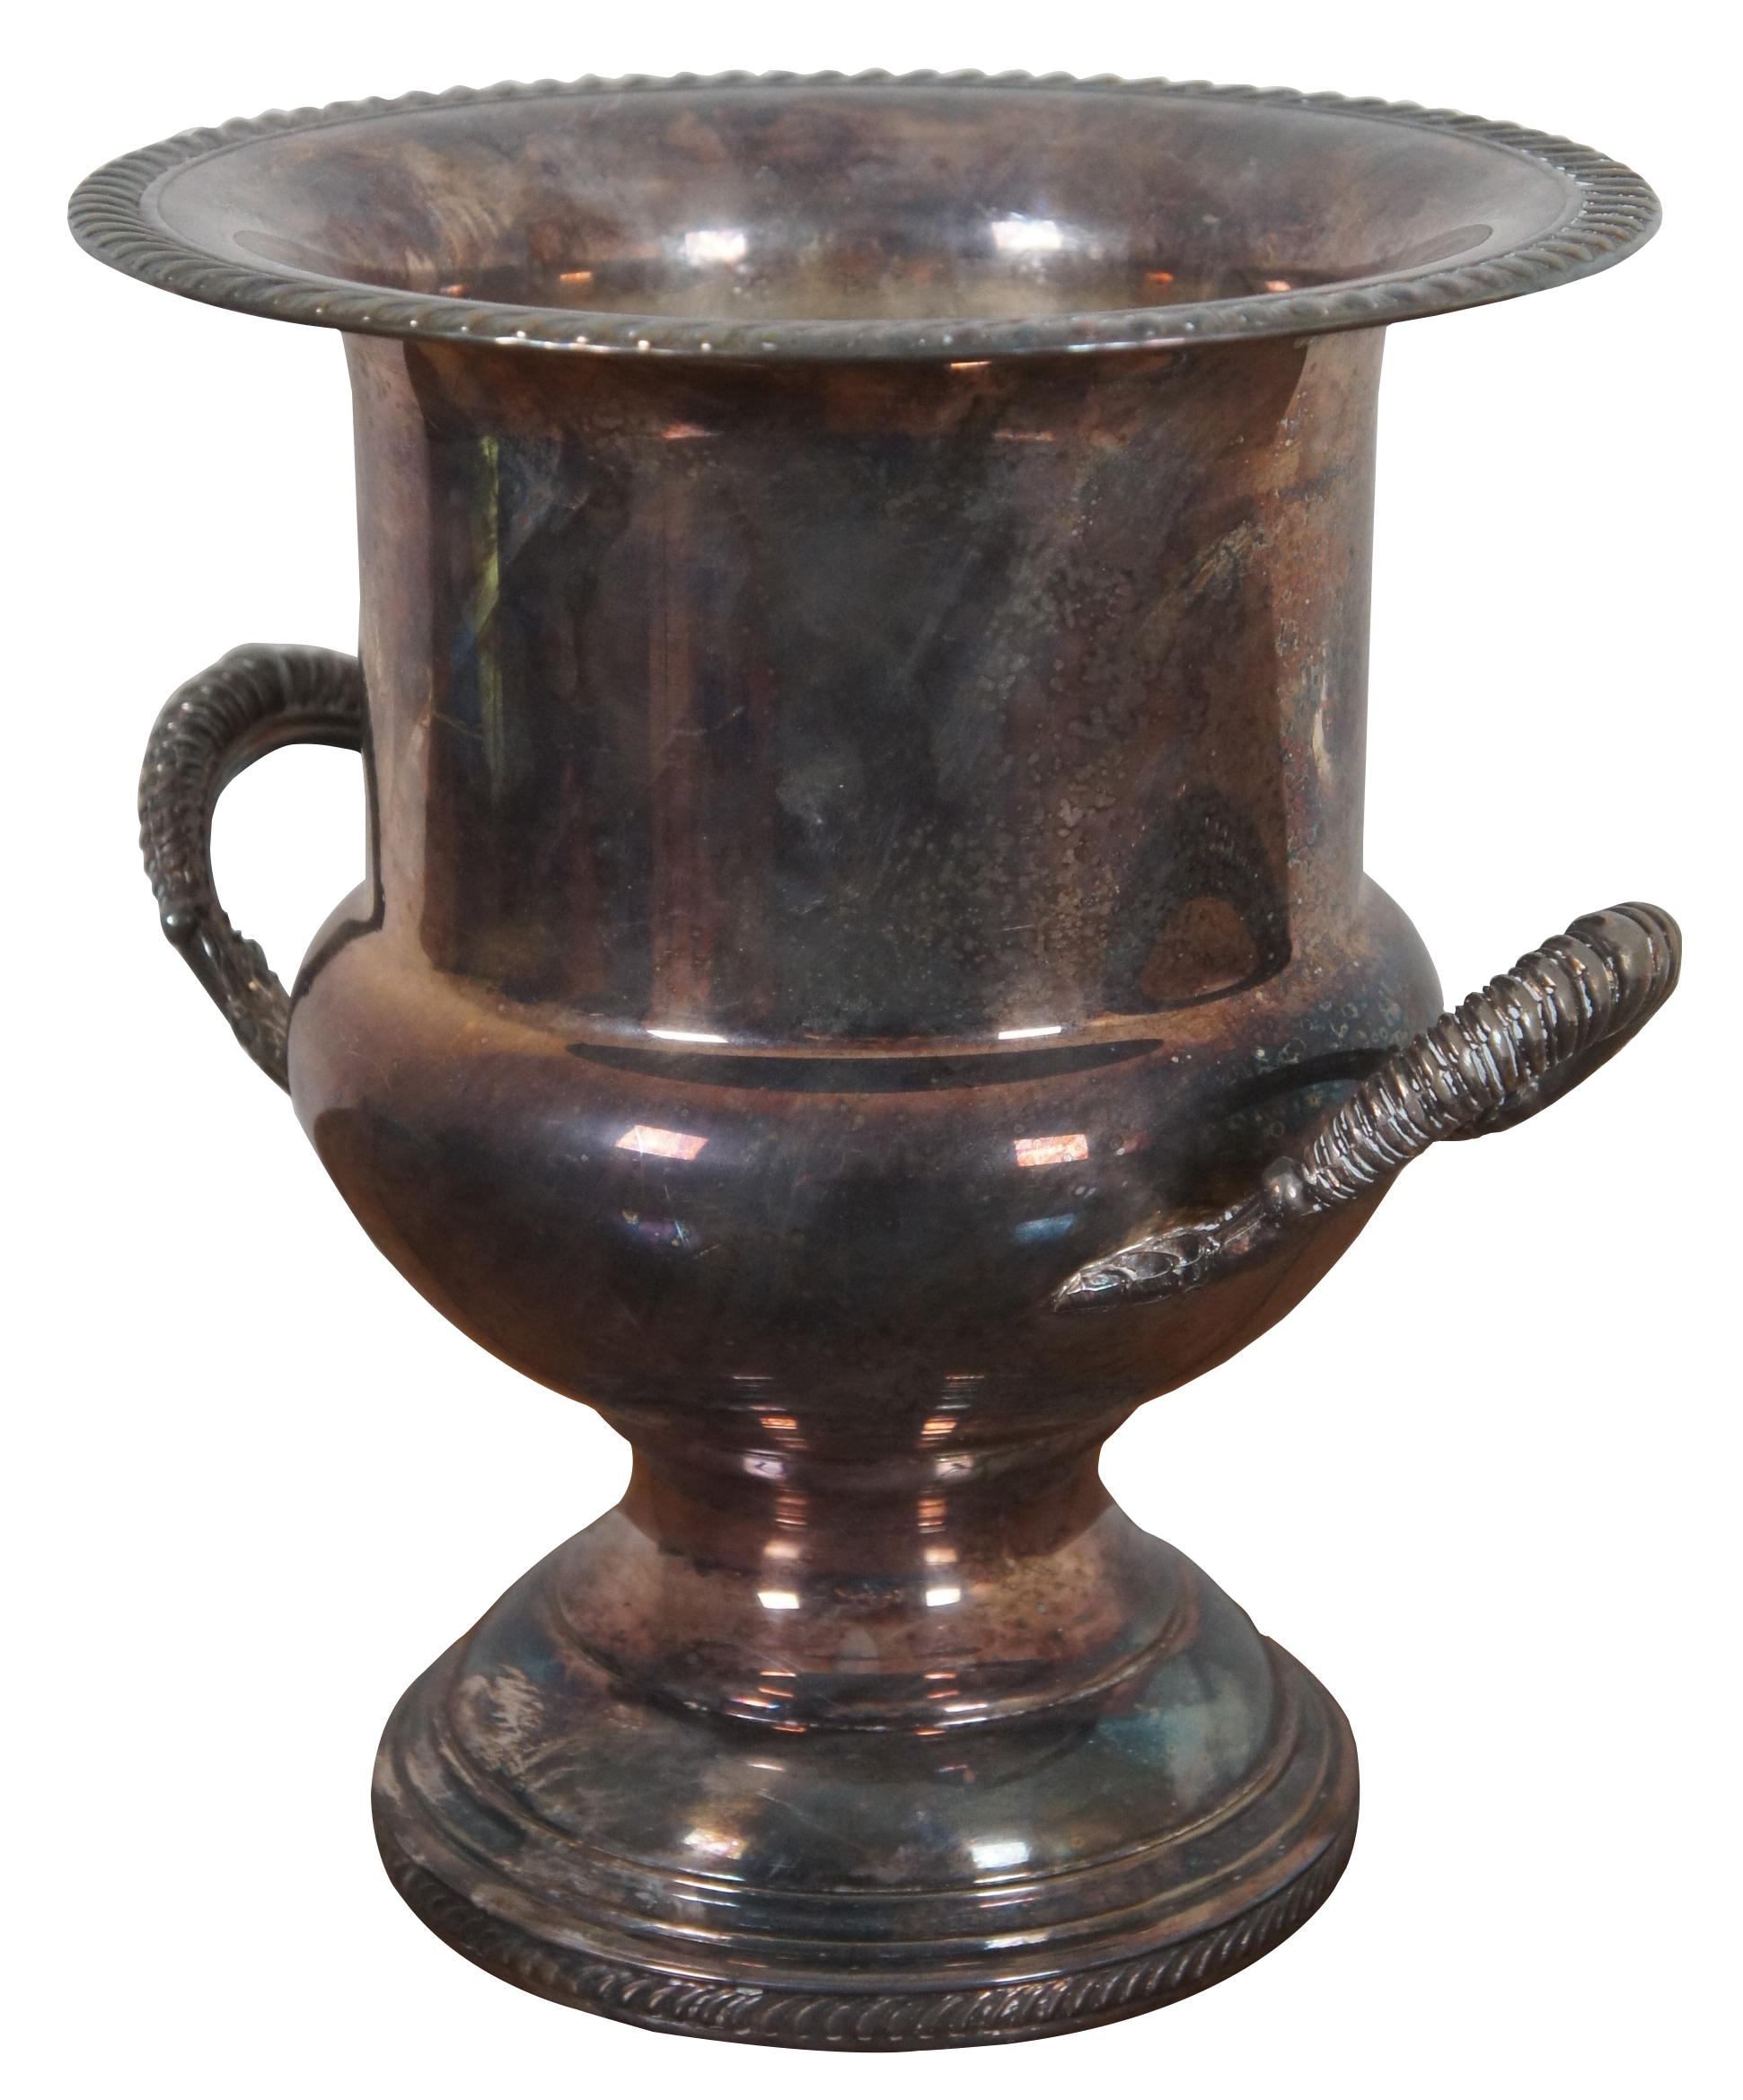 Antique W&S Blackinton number 917 fine silver plate trophy urn style ice bucket or champagne chiller with handles and footed base. “ Started by 2 brothers in 1865. W. S. Blackinton Co. was originally a manufacturer of gold jewelry in Meriden, CT.